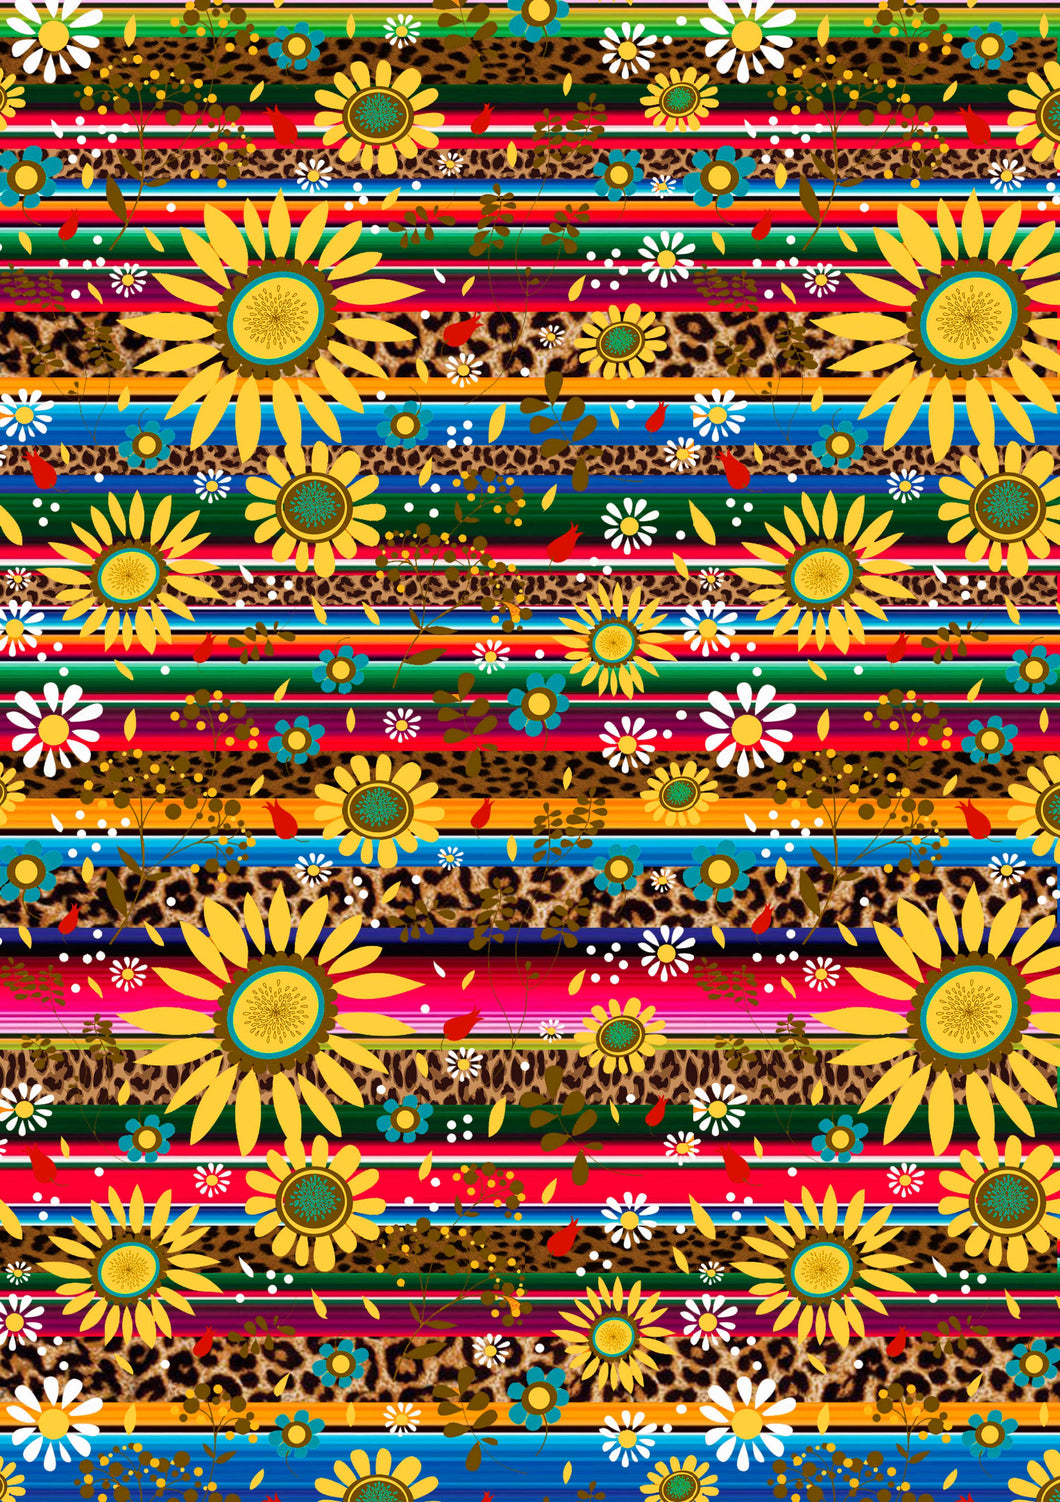 12 x 17 Serape Cheetah Sunflowers Animal Print Light and FLORAL Mexico  Colorful Background Pattern HTV Sheet